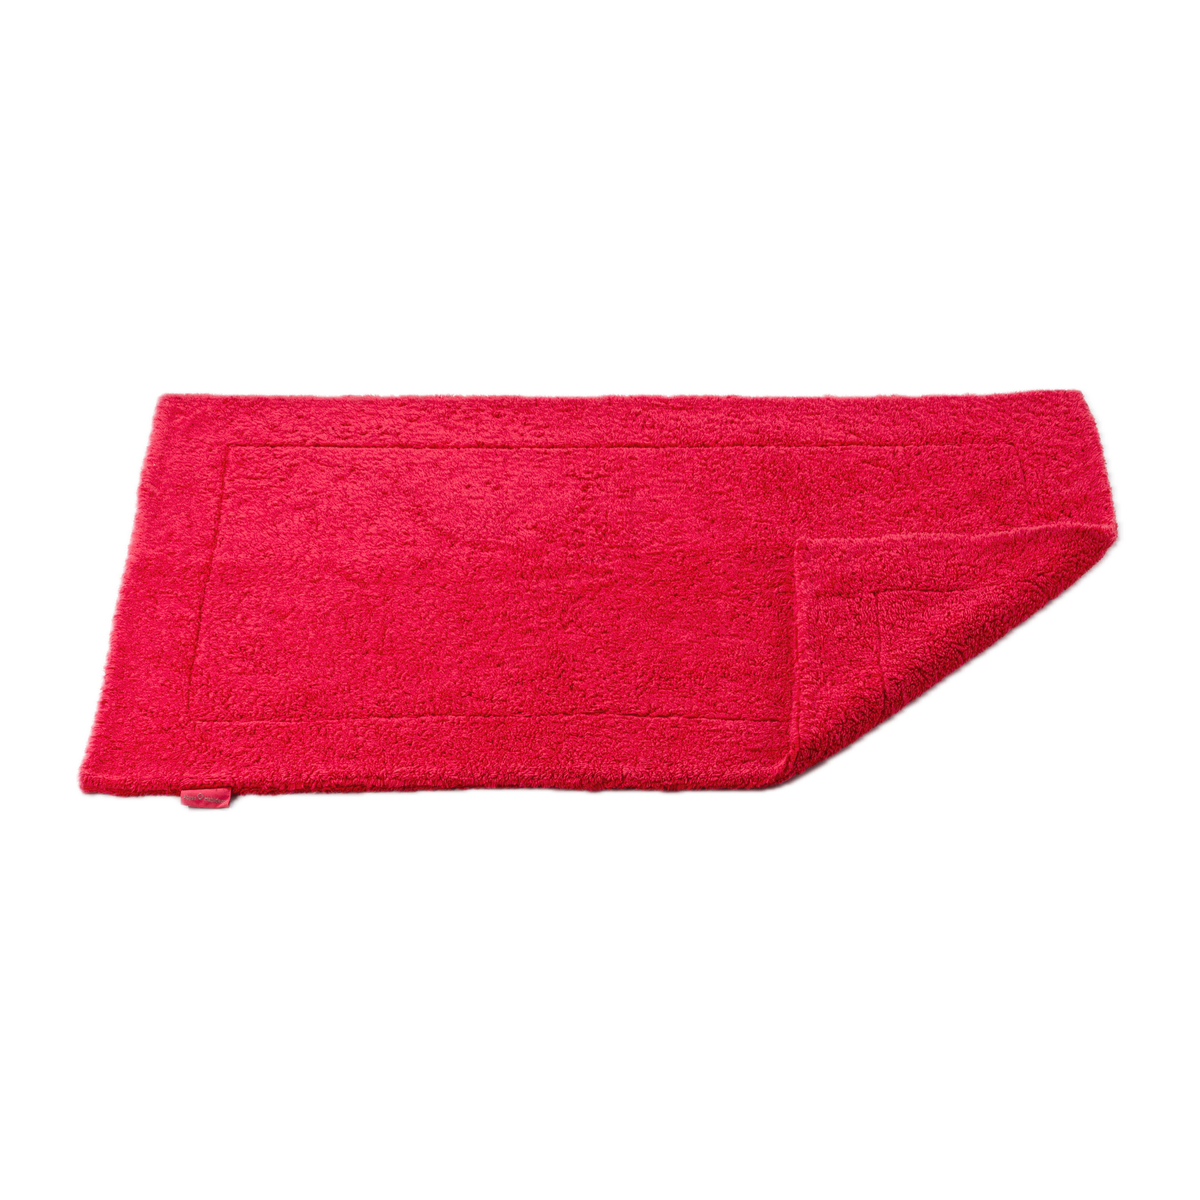 Abyss Double Bath Tub Mat in Viva Magenta (579) Color with Fold